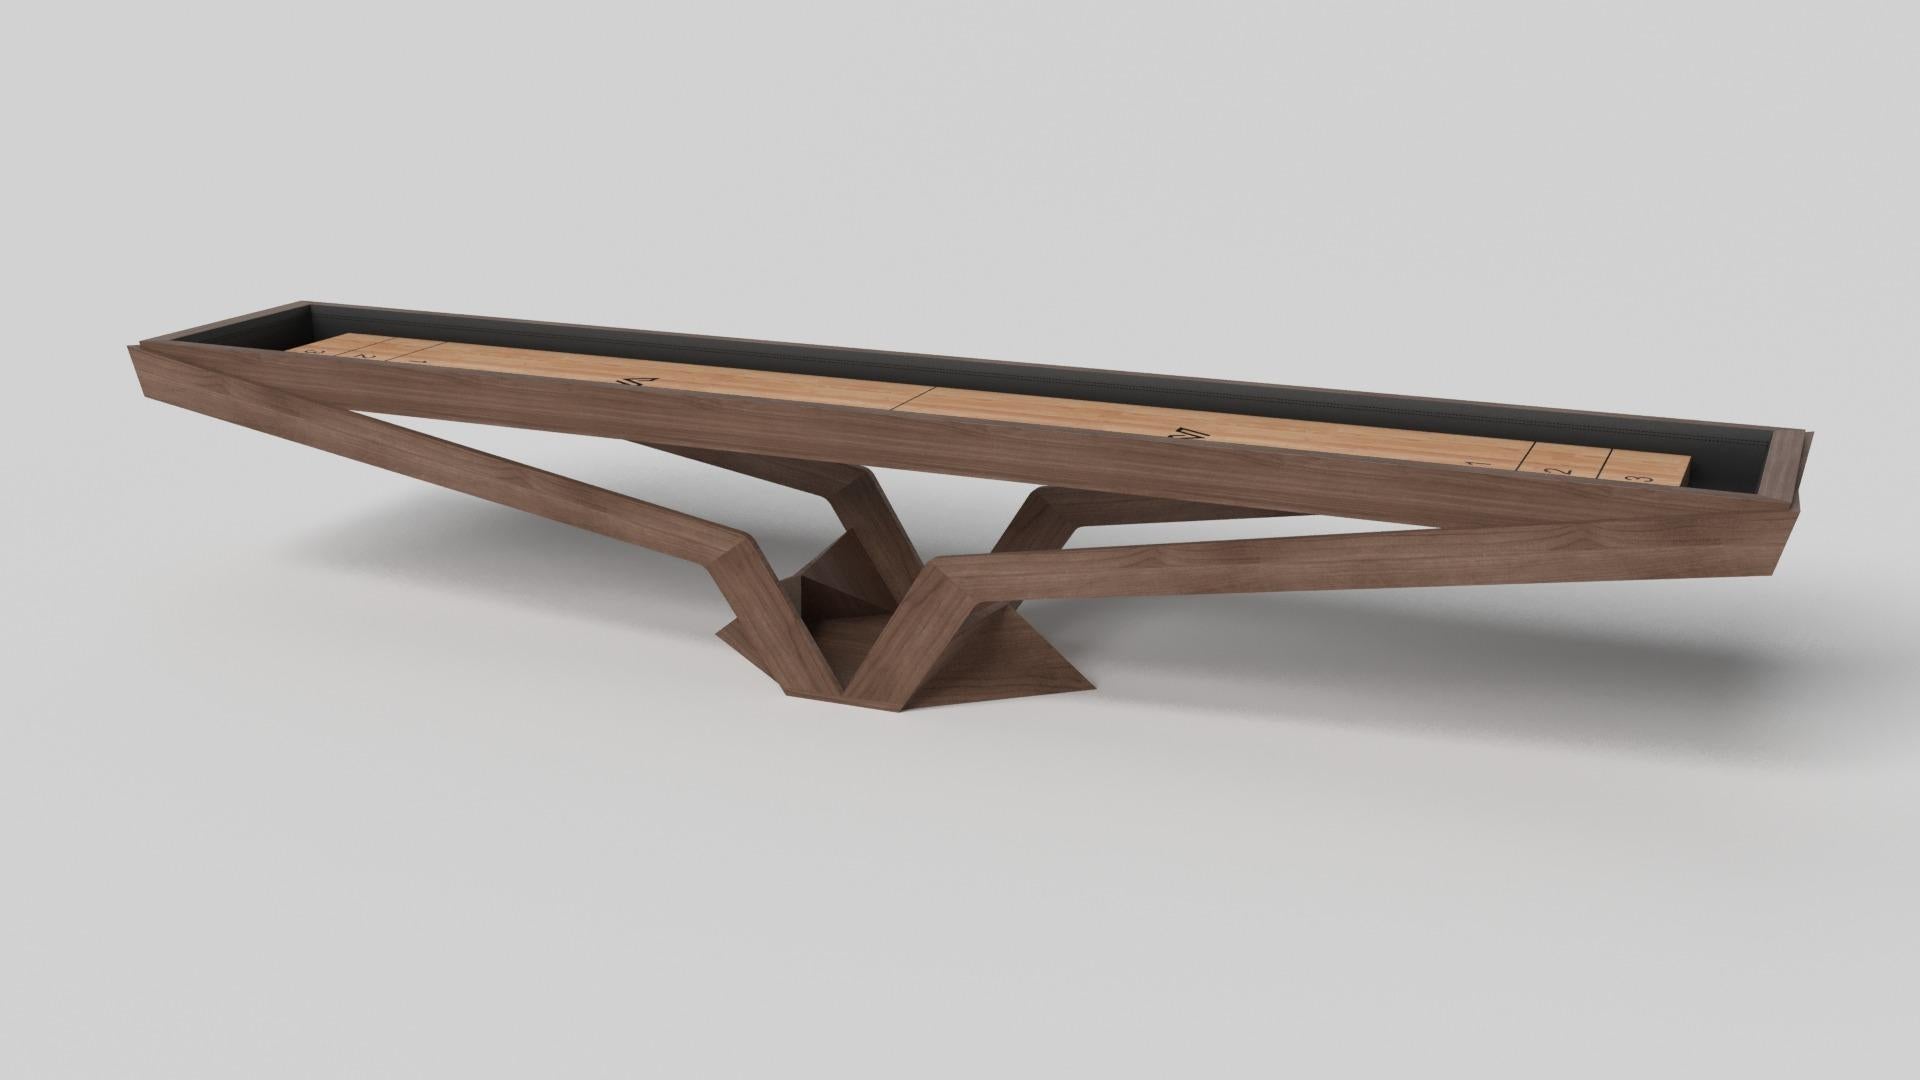 The Enzo shuffleboard table is Inspired by the aerodynamic angles of top-of-the-line European vehicles. Designed with sleek, V-shaped lines and a thoughtful use of negative space, this table boasts an energetic sense of spirit while epitomizing the